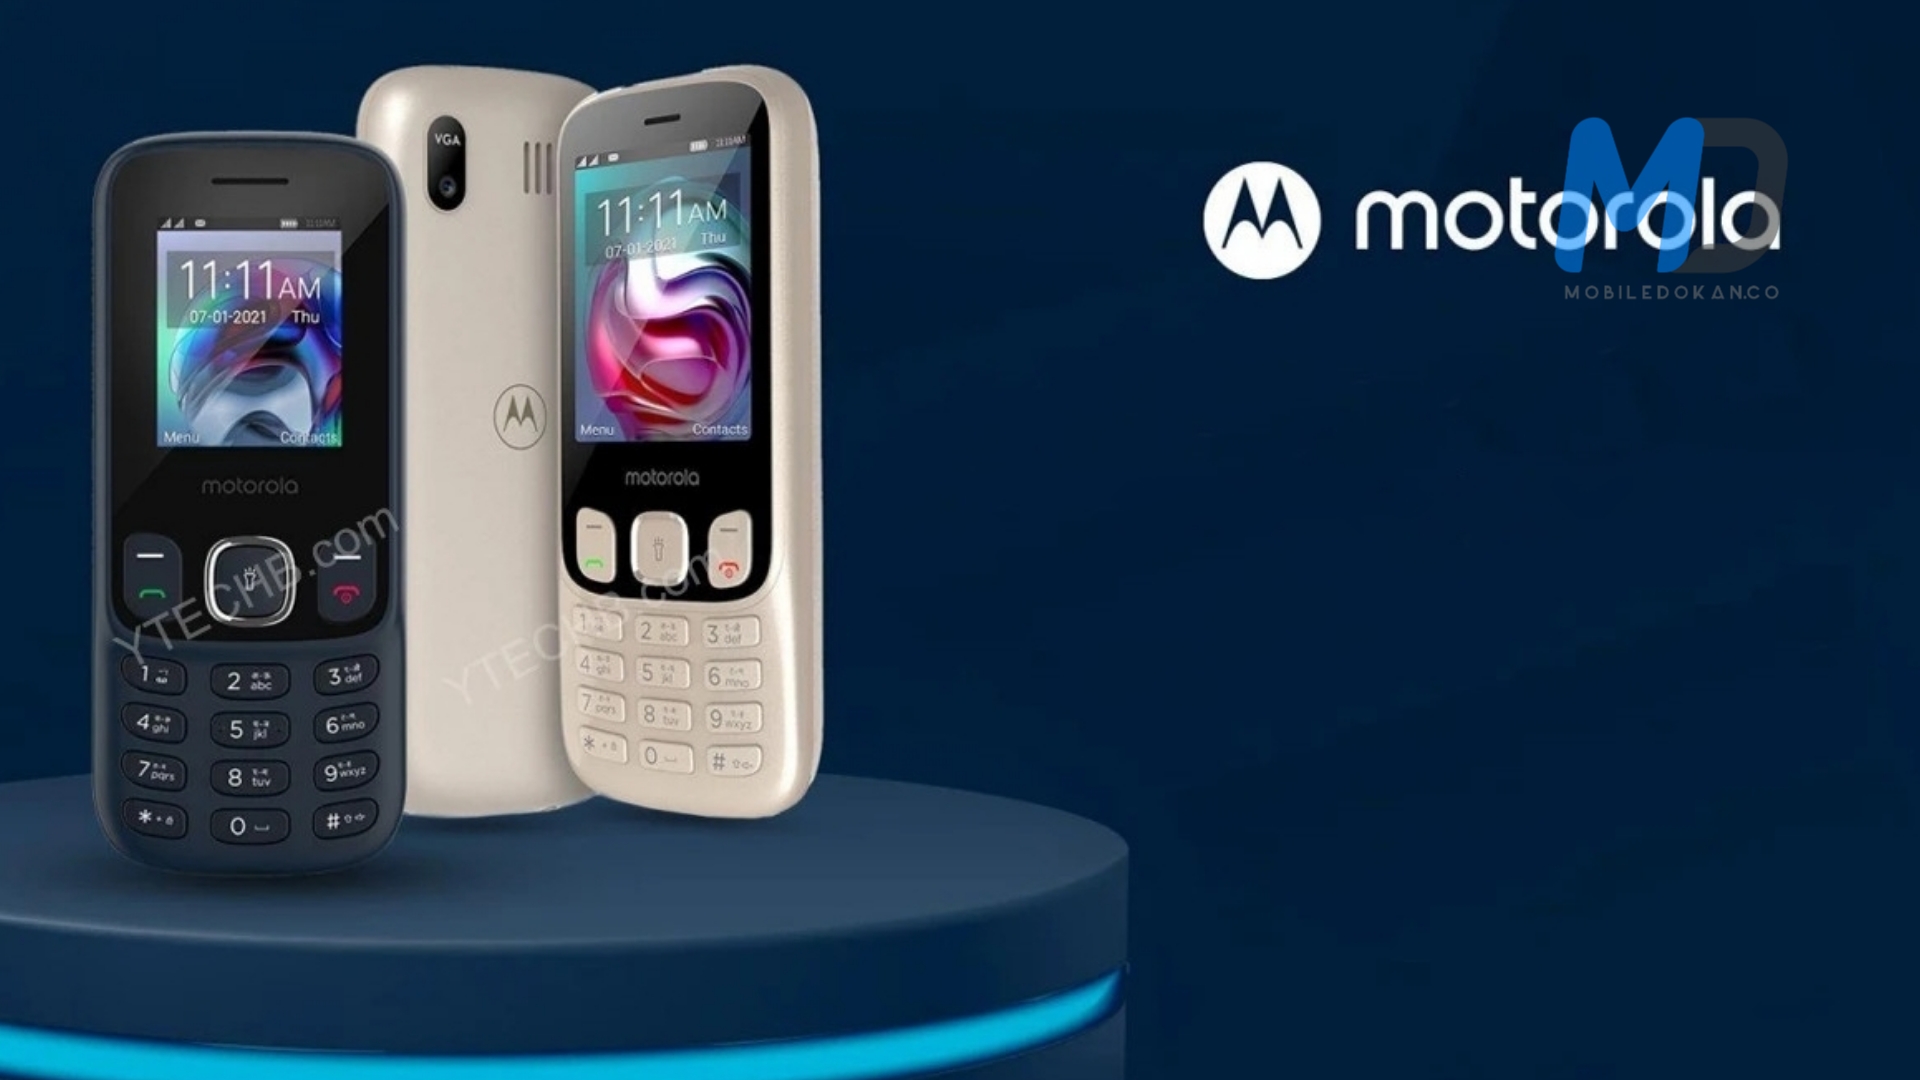 Motorola wanted to launch three new feature phones